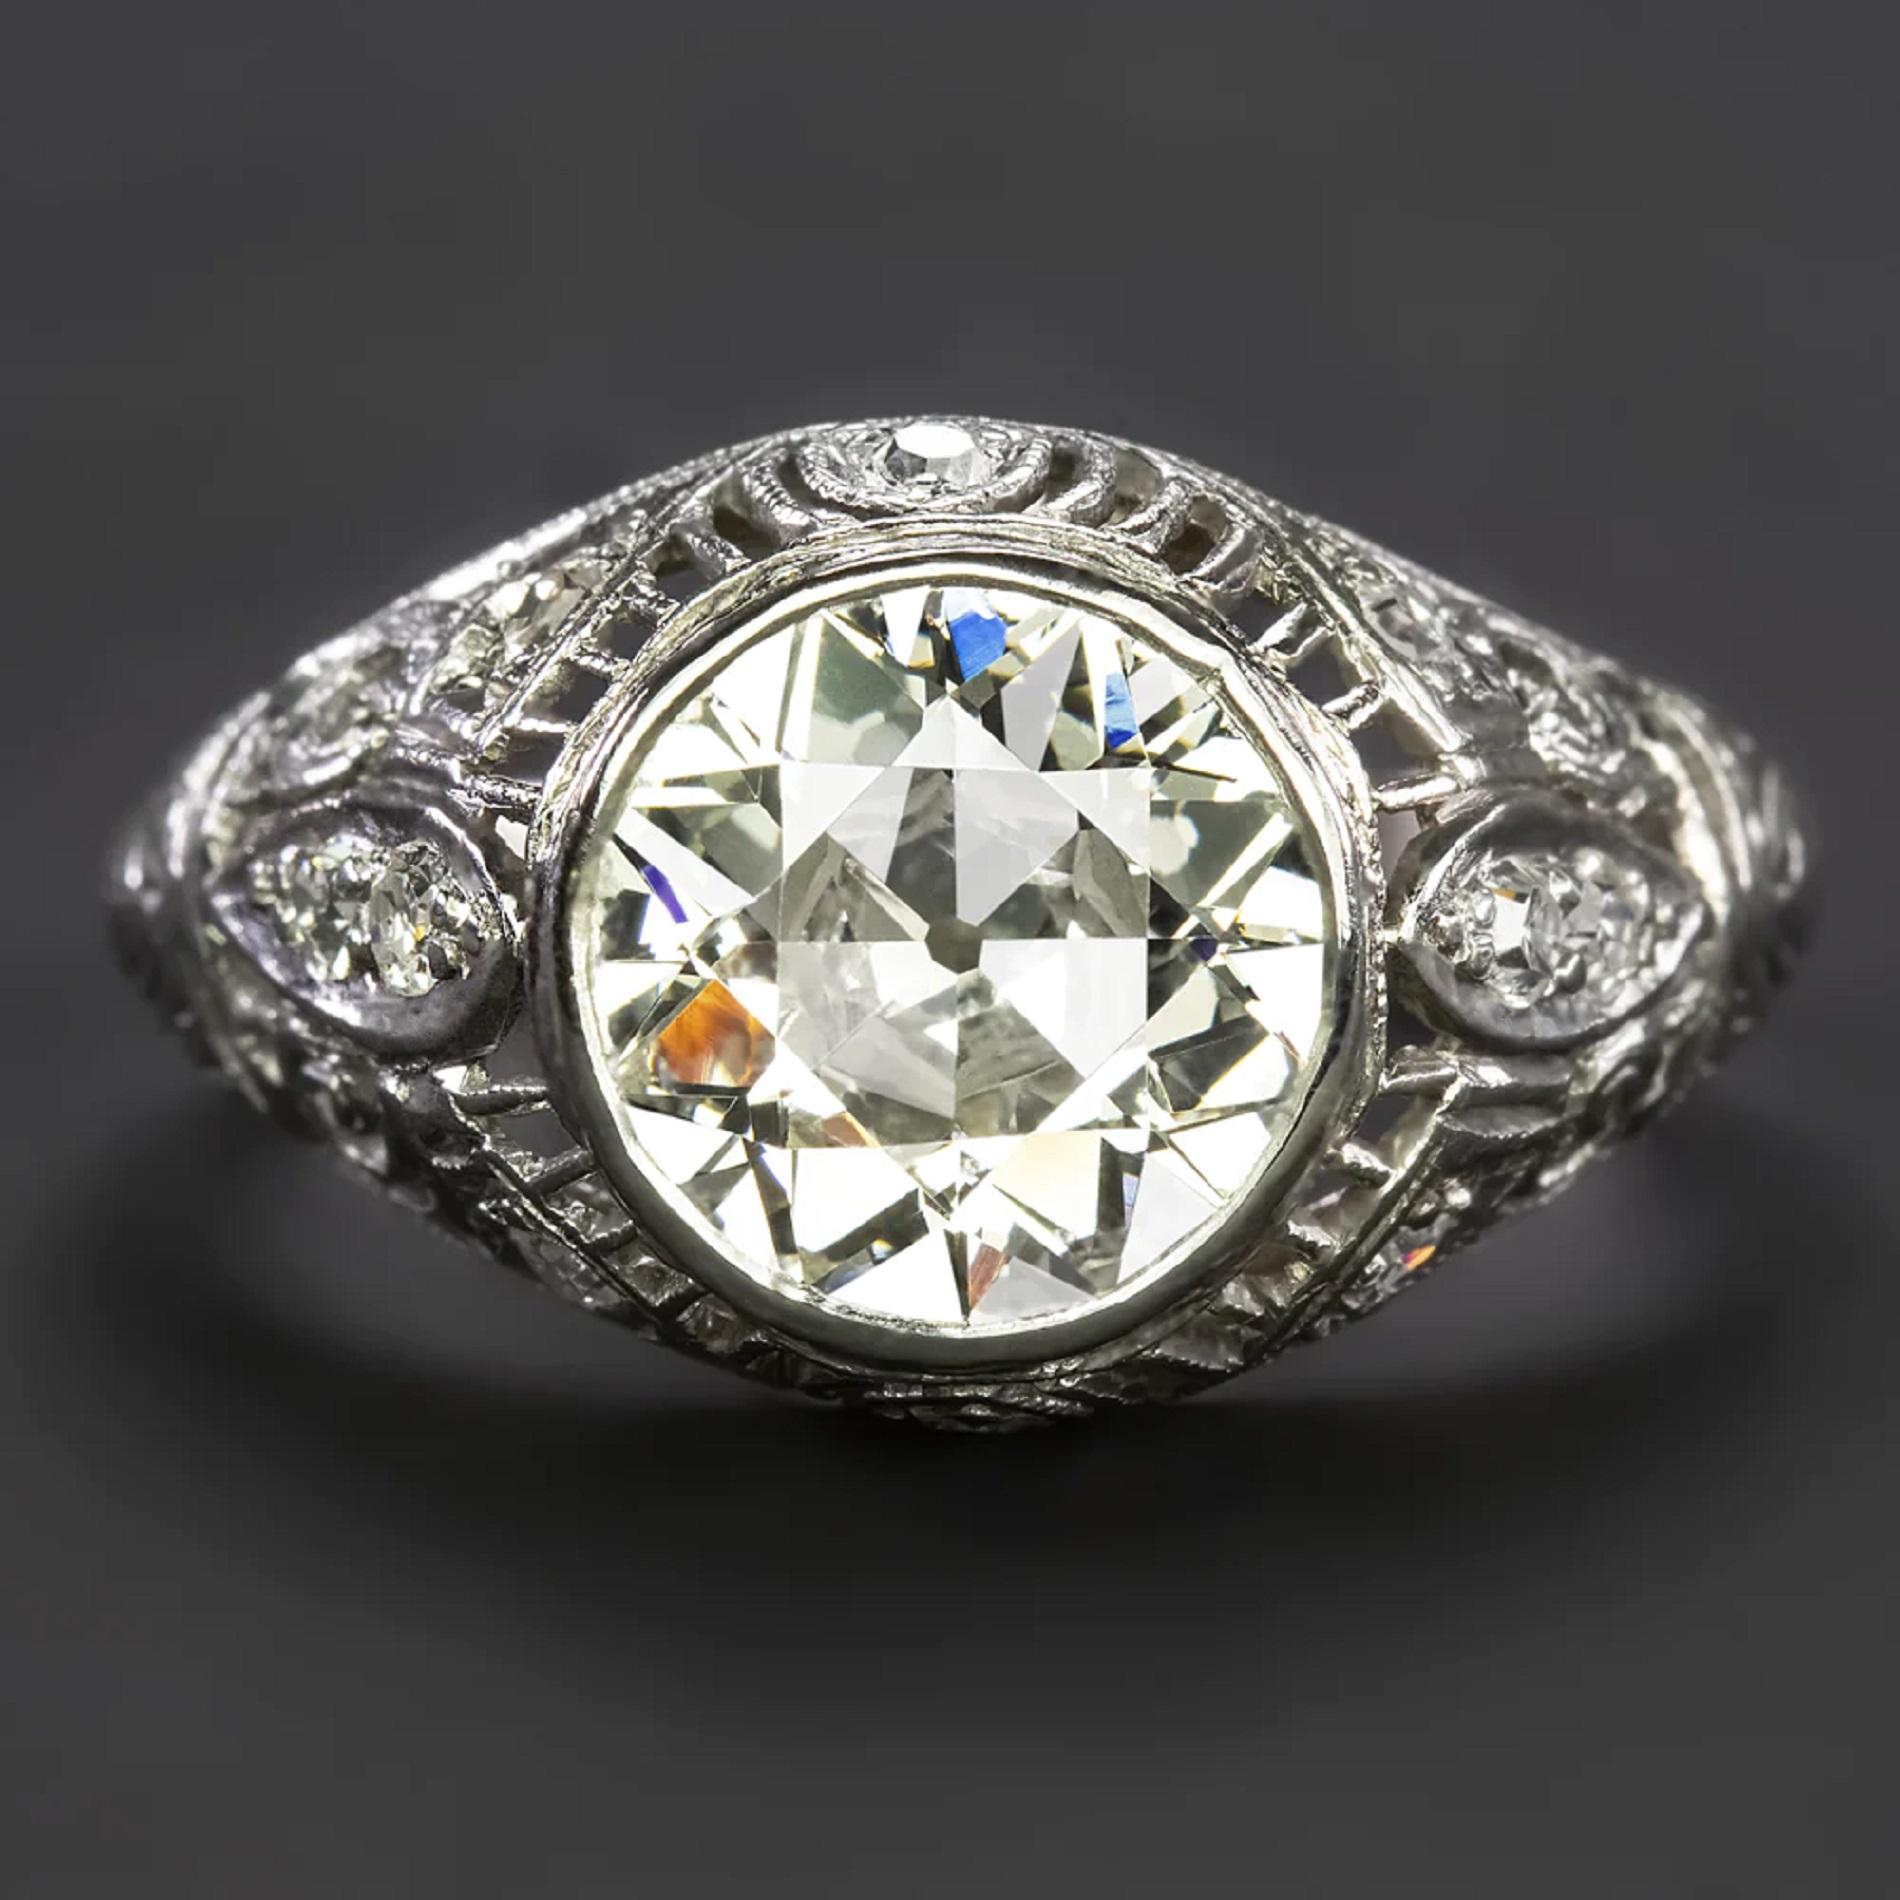 Crafted in the Art Deco era, this vintage engagement ring has a commanding presence with a dazzling 2.27 carat old European cut diamond center! The platinum setting is beautifully detailed with a diamond studded, intricate filigree dome